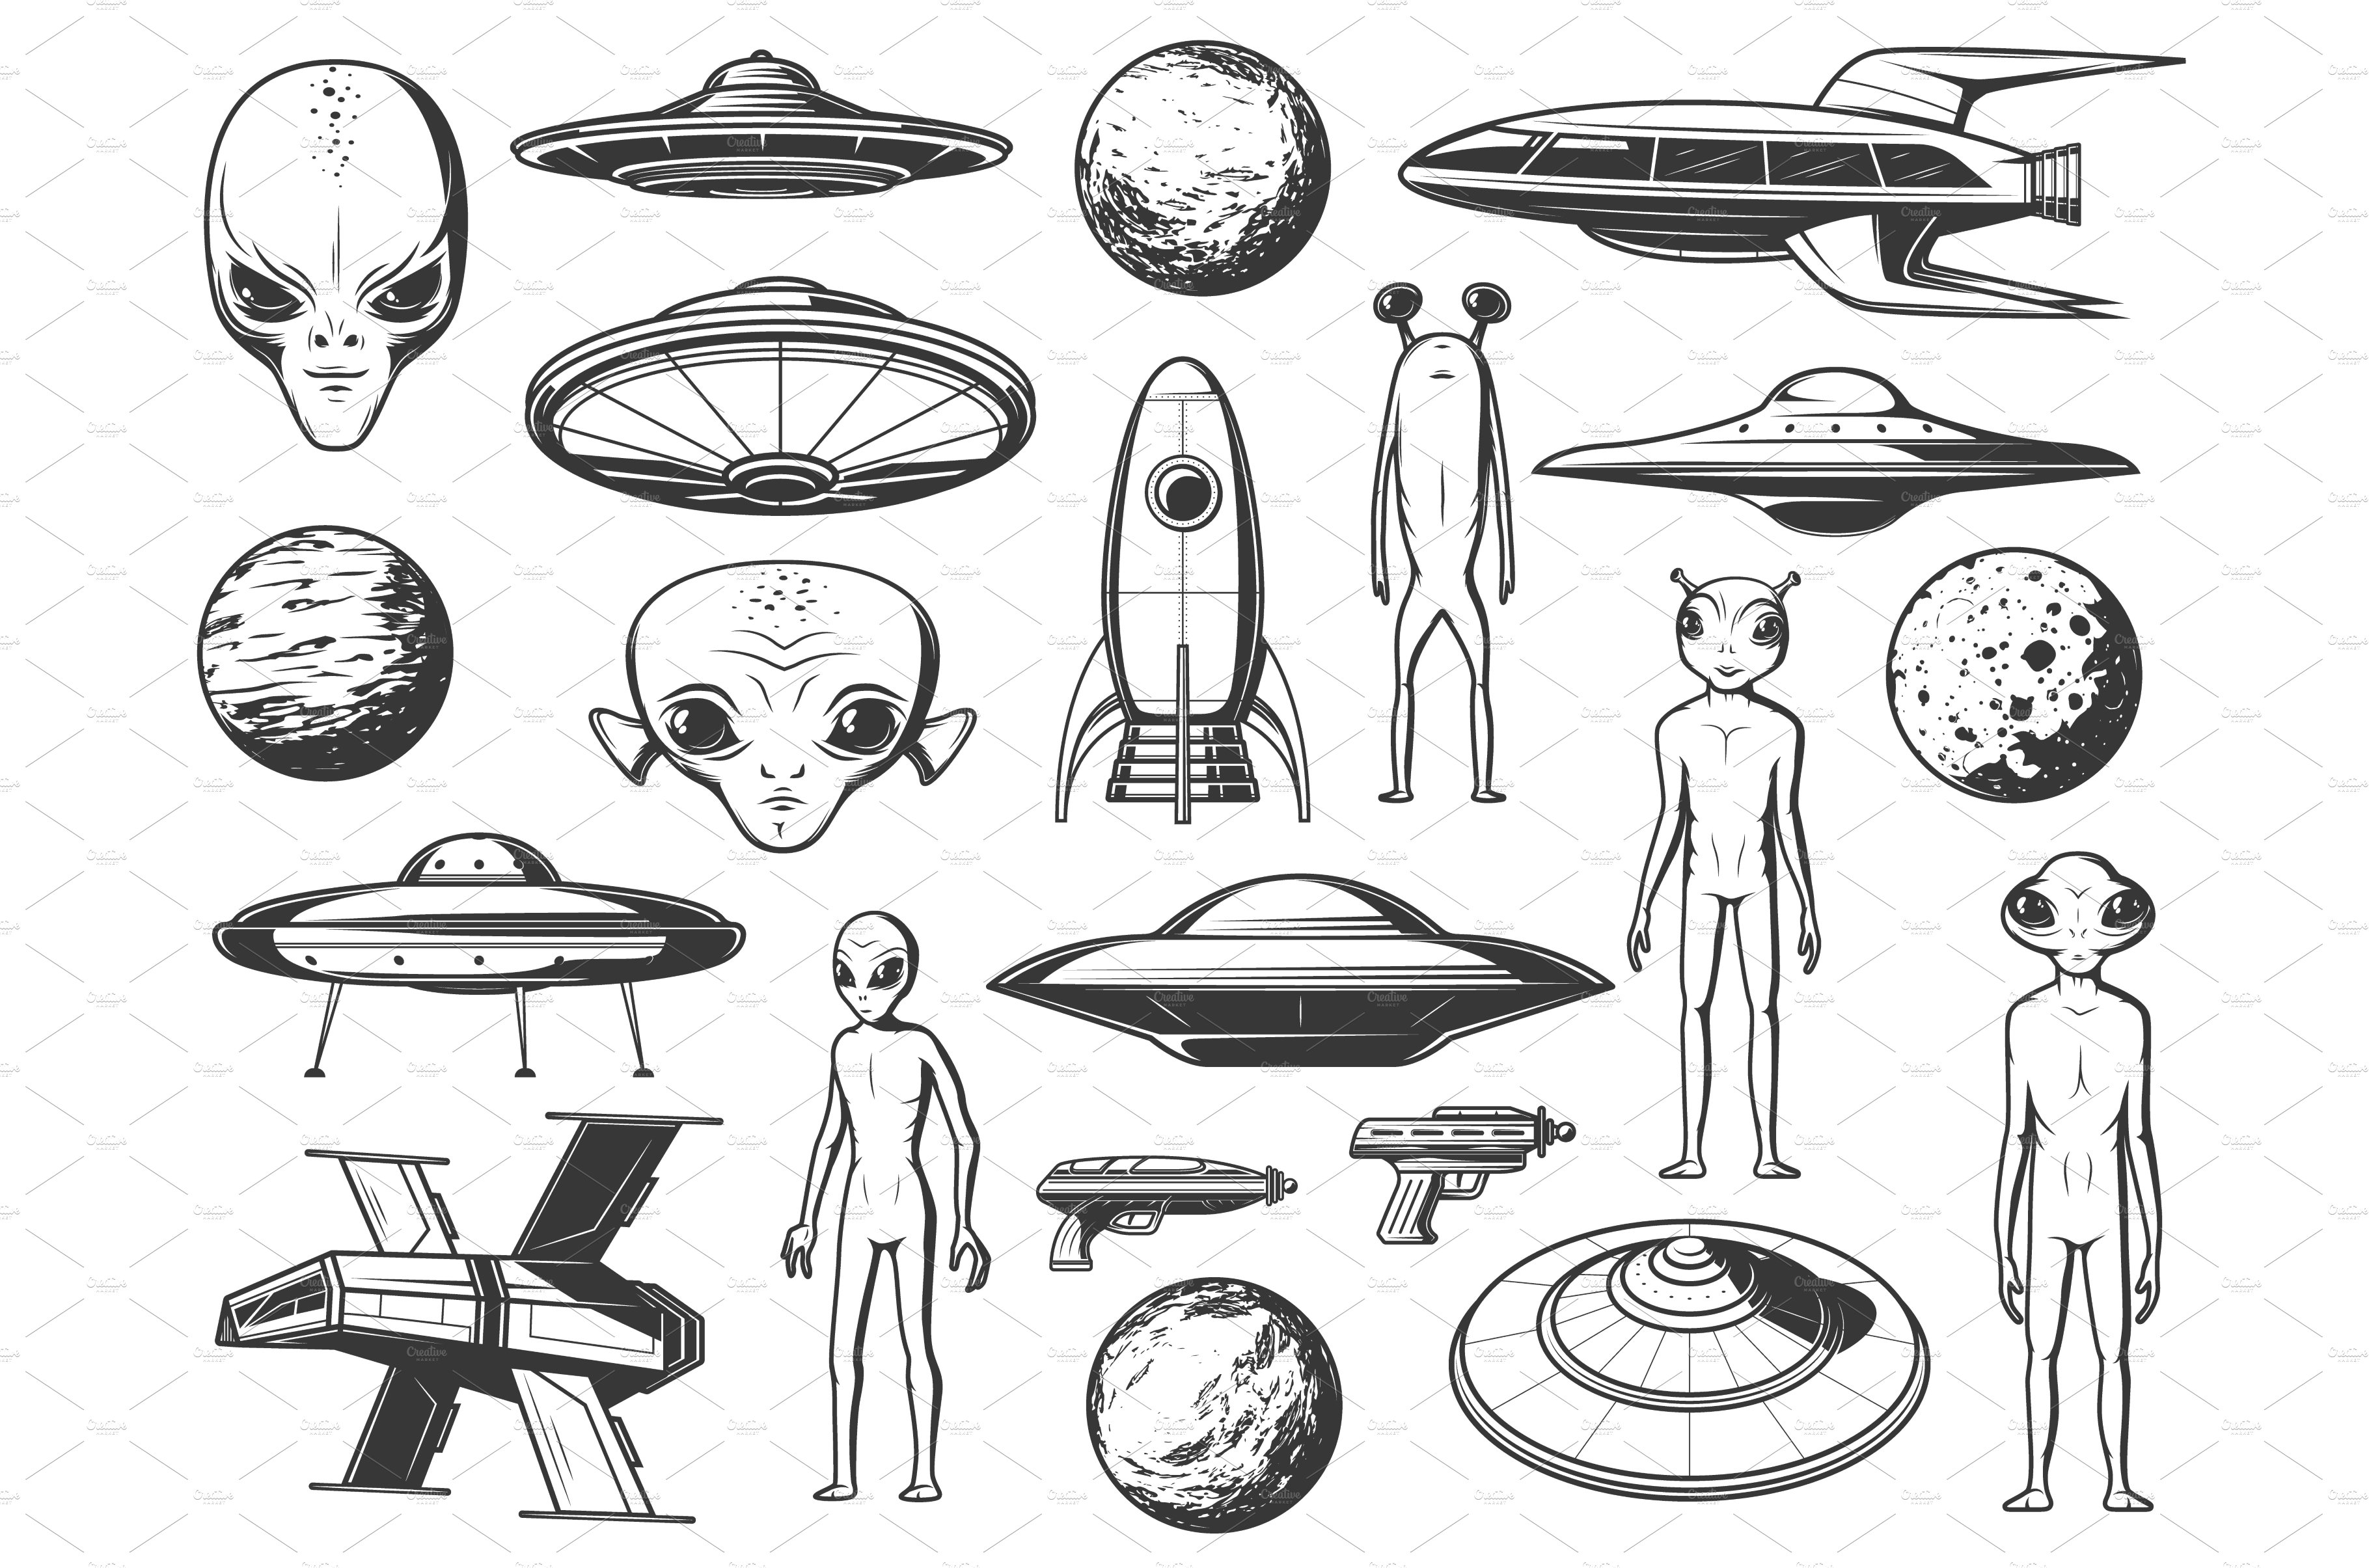 Aliens, ufo, spaceships, planets cover image.